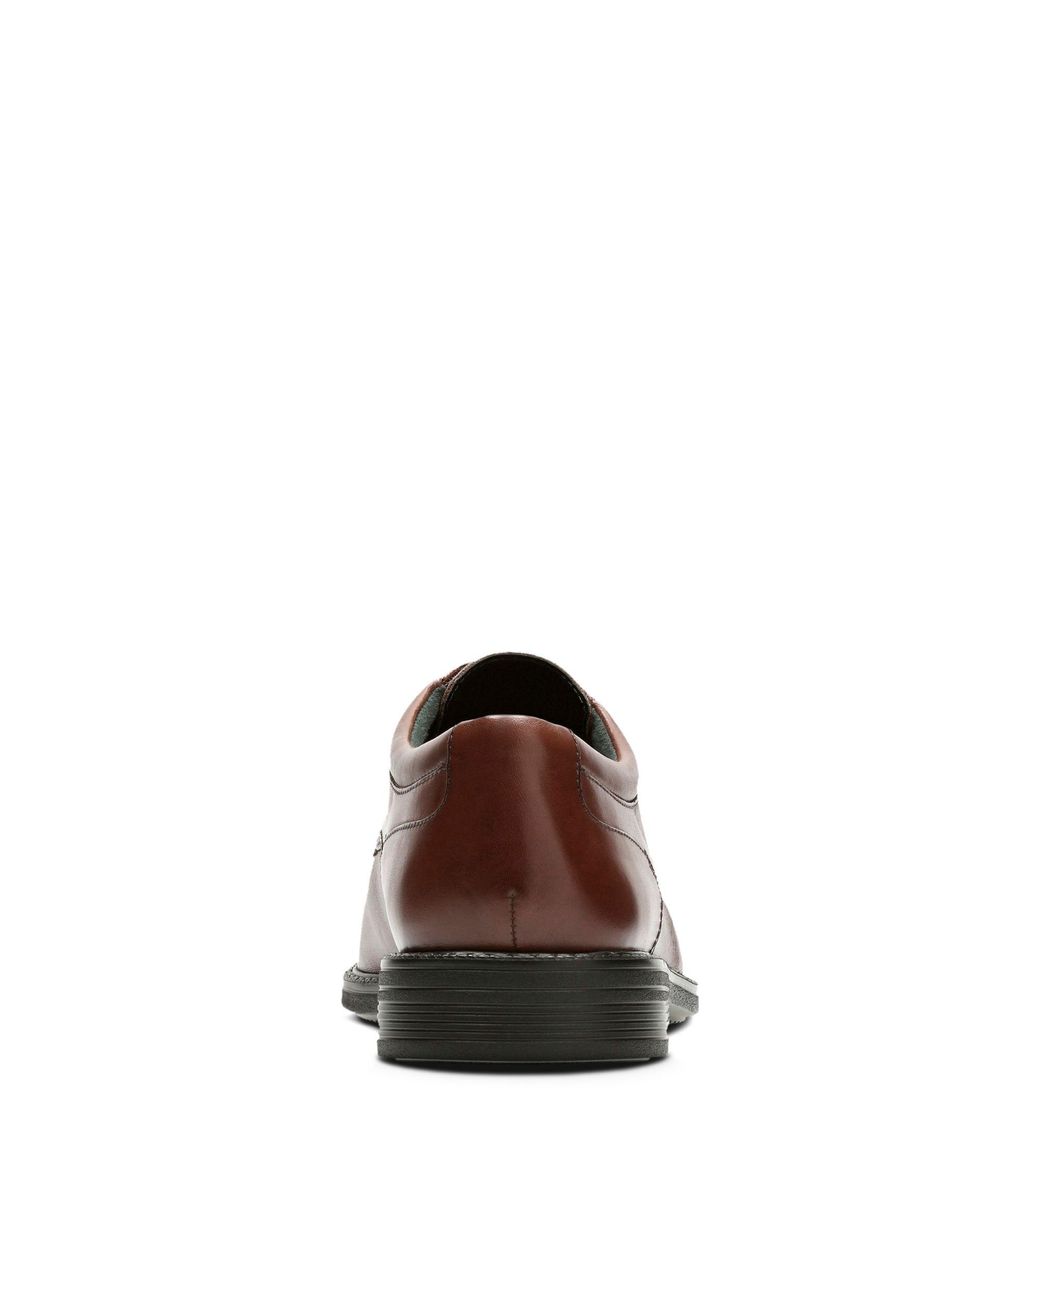 Clarks Leather Ipswich Apron in Brown Leather (Brown) for Men - Lyst